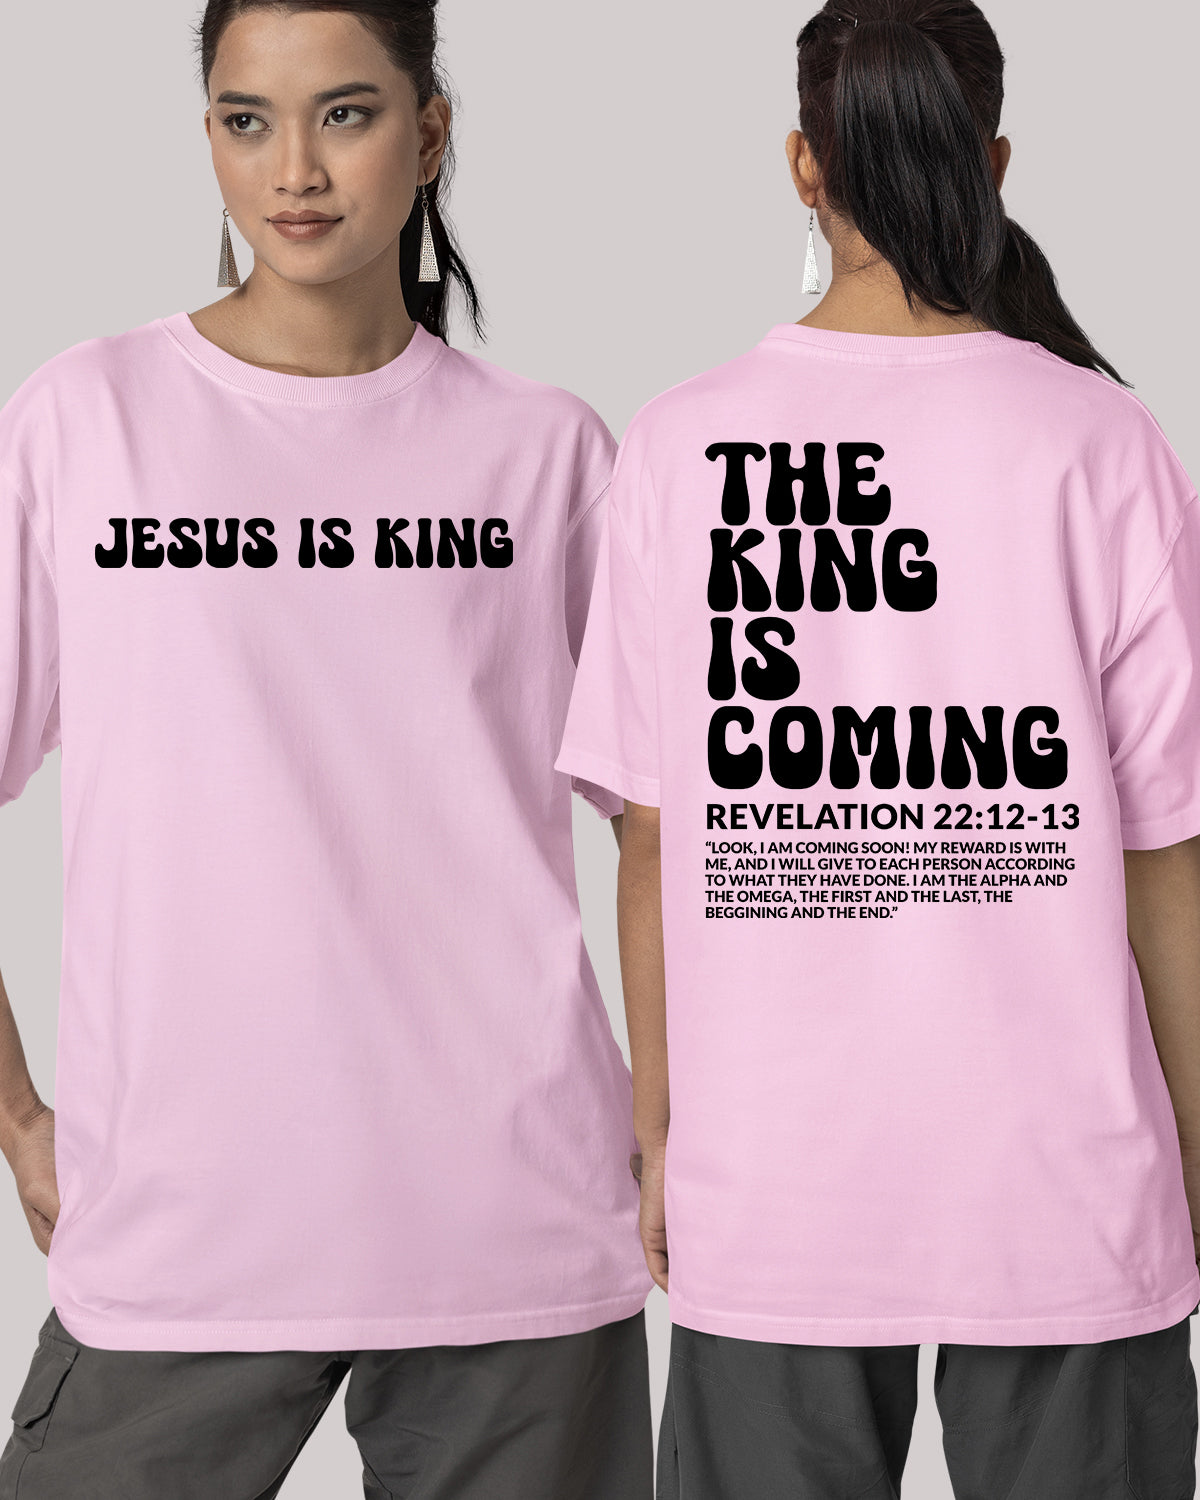 The King is Coming Revelation Jesus Bible Verse Front back T Shirt